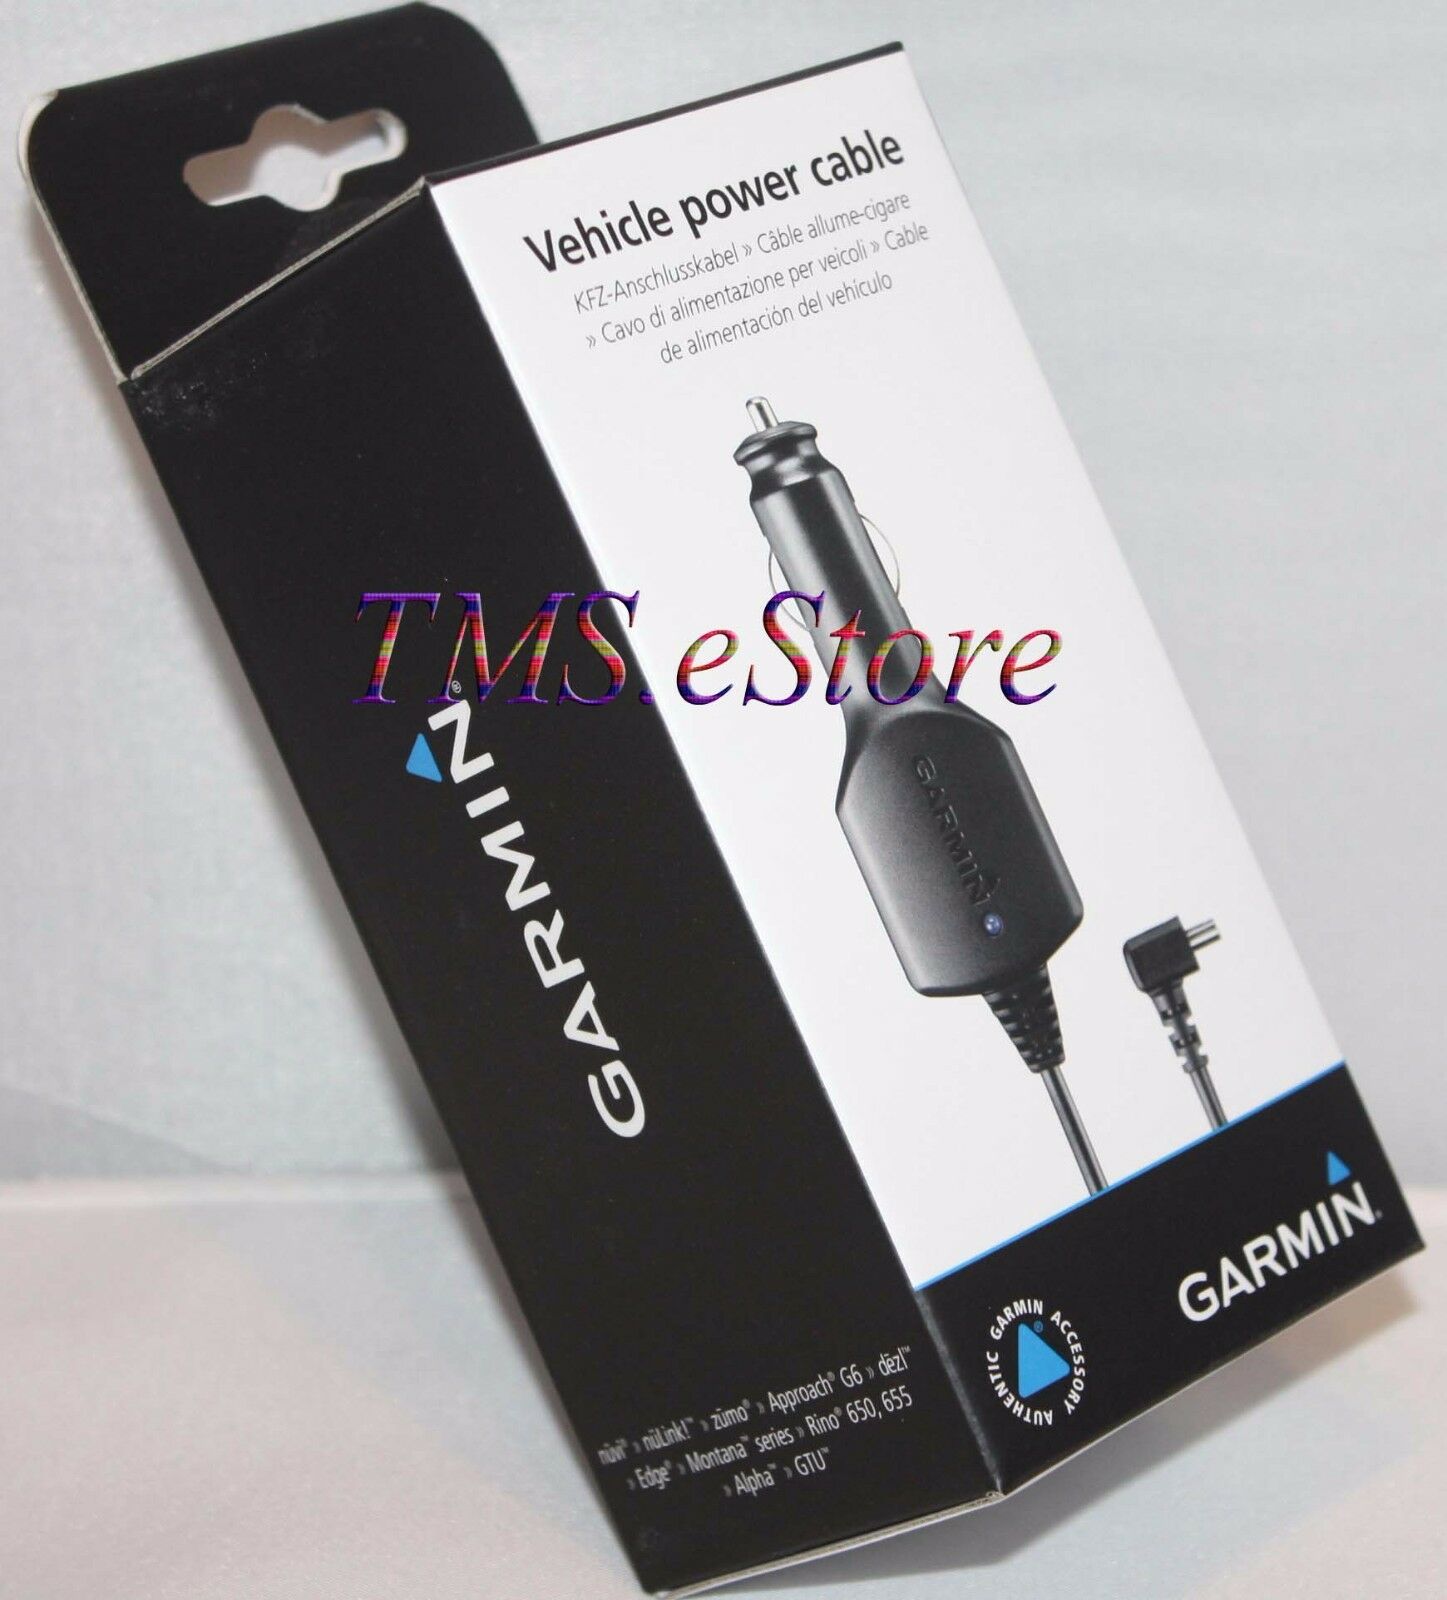 Ta-20 Traffic Antenna Power Cable Design For Garmin Nuvi Gps W/built In Receiver